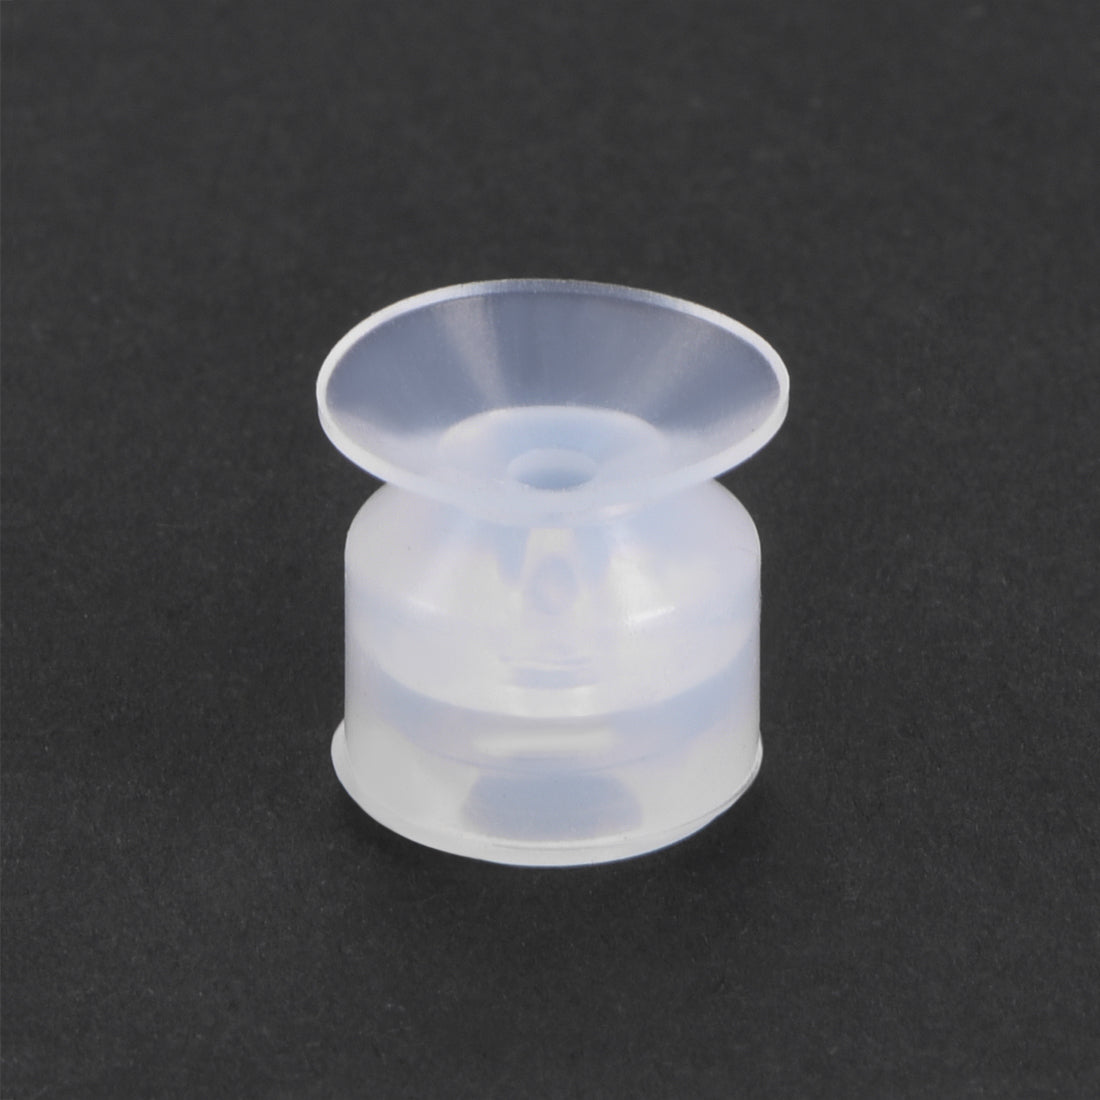 uxcell Uxcell Clear White Soft Silicone Waterproof  Miniature Vacuum Suction Cup 10mmx5mm Bellows Suction Cup,4pcs